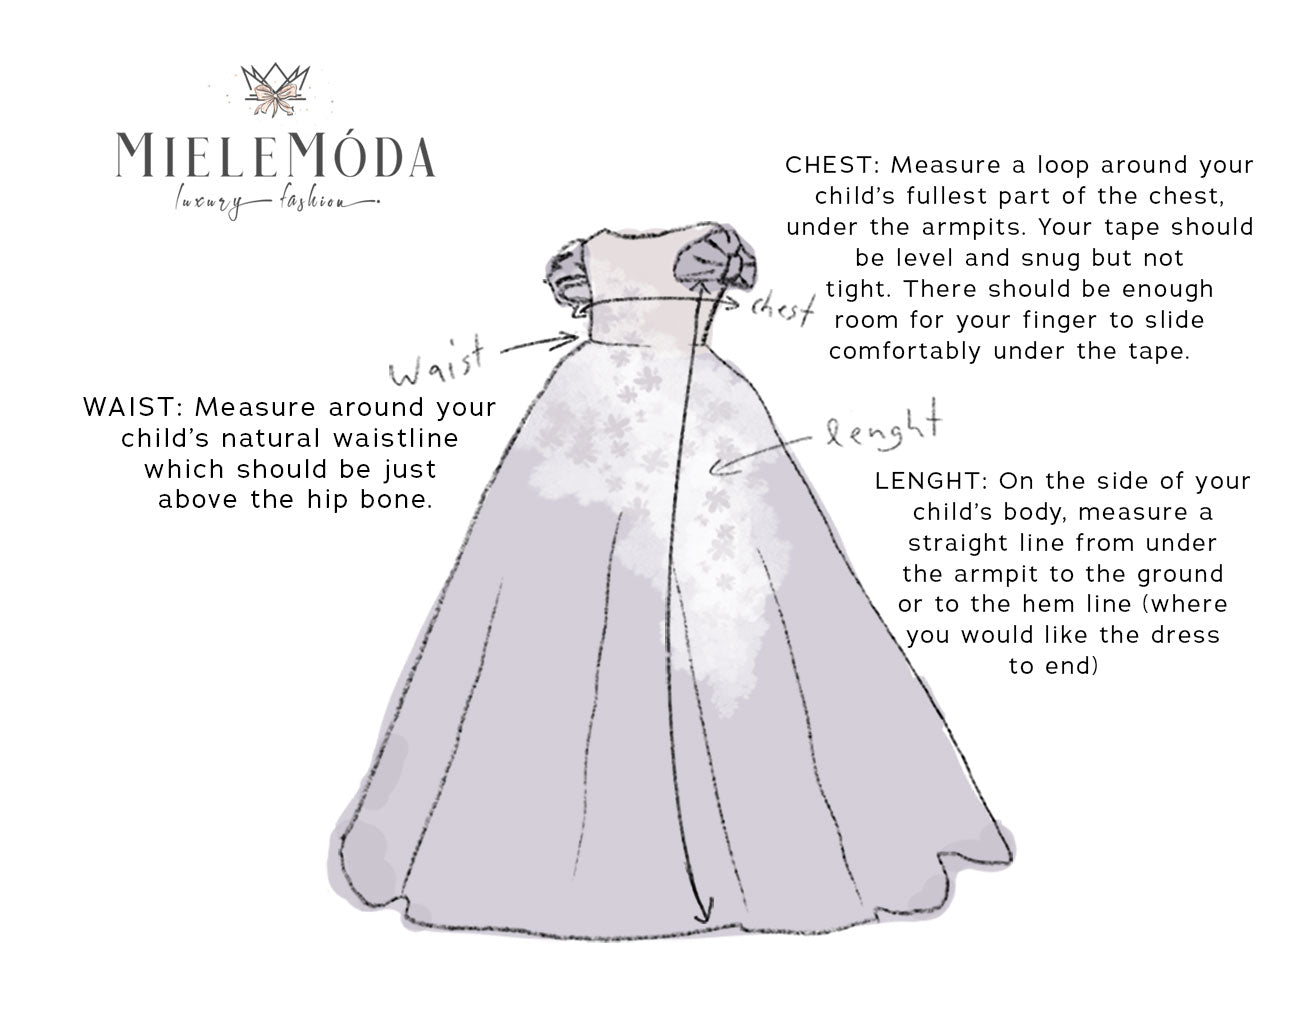 <alt>flower girl dress drawing showing how to measure miele moda boutique</alt>